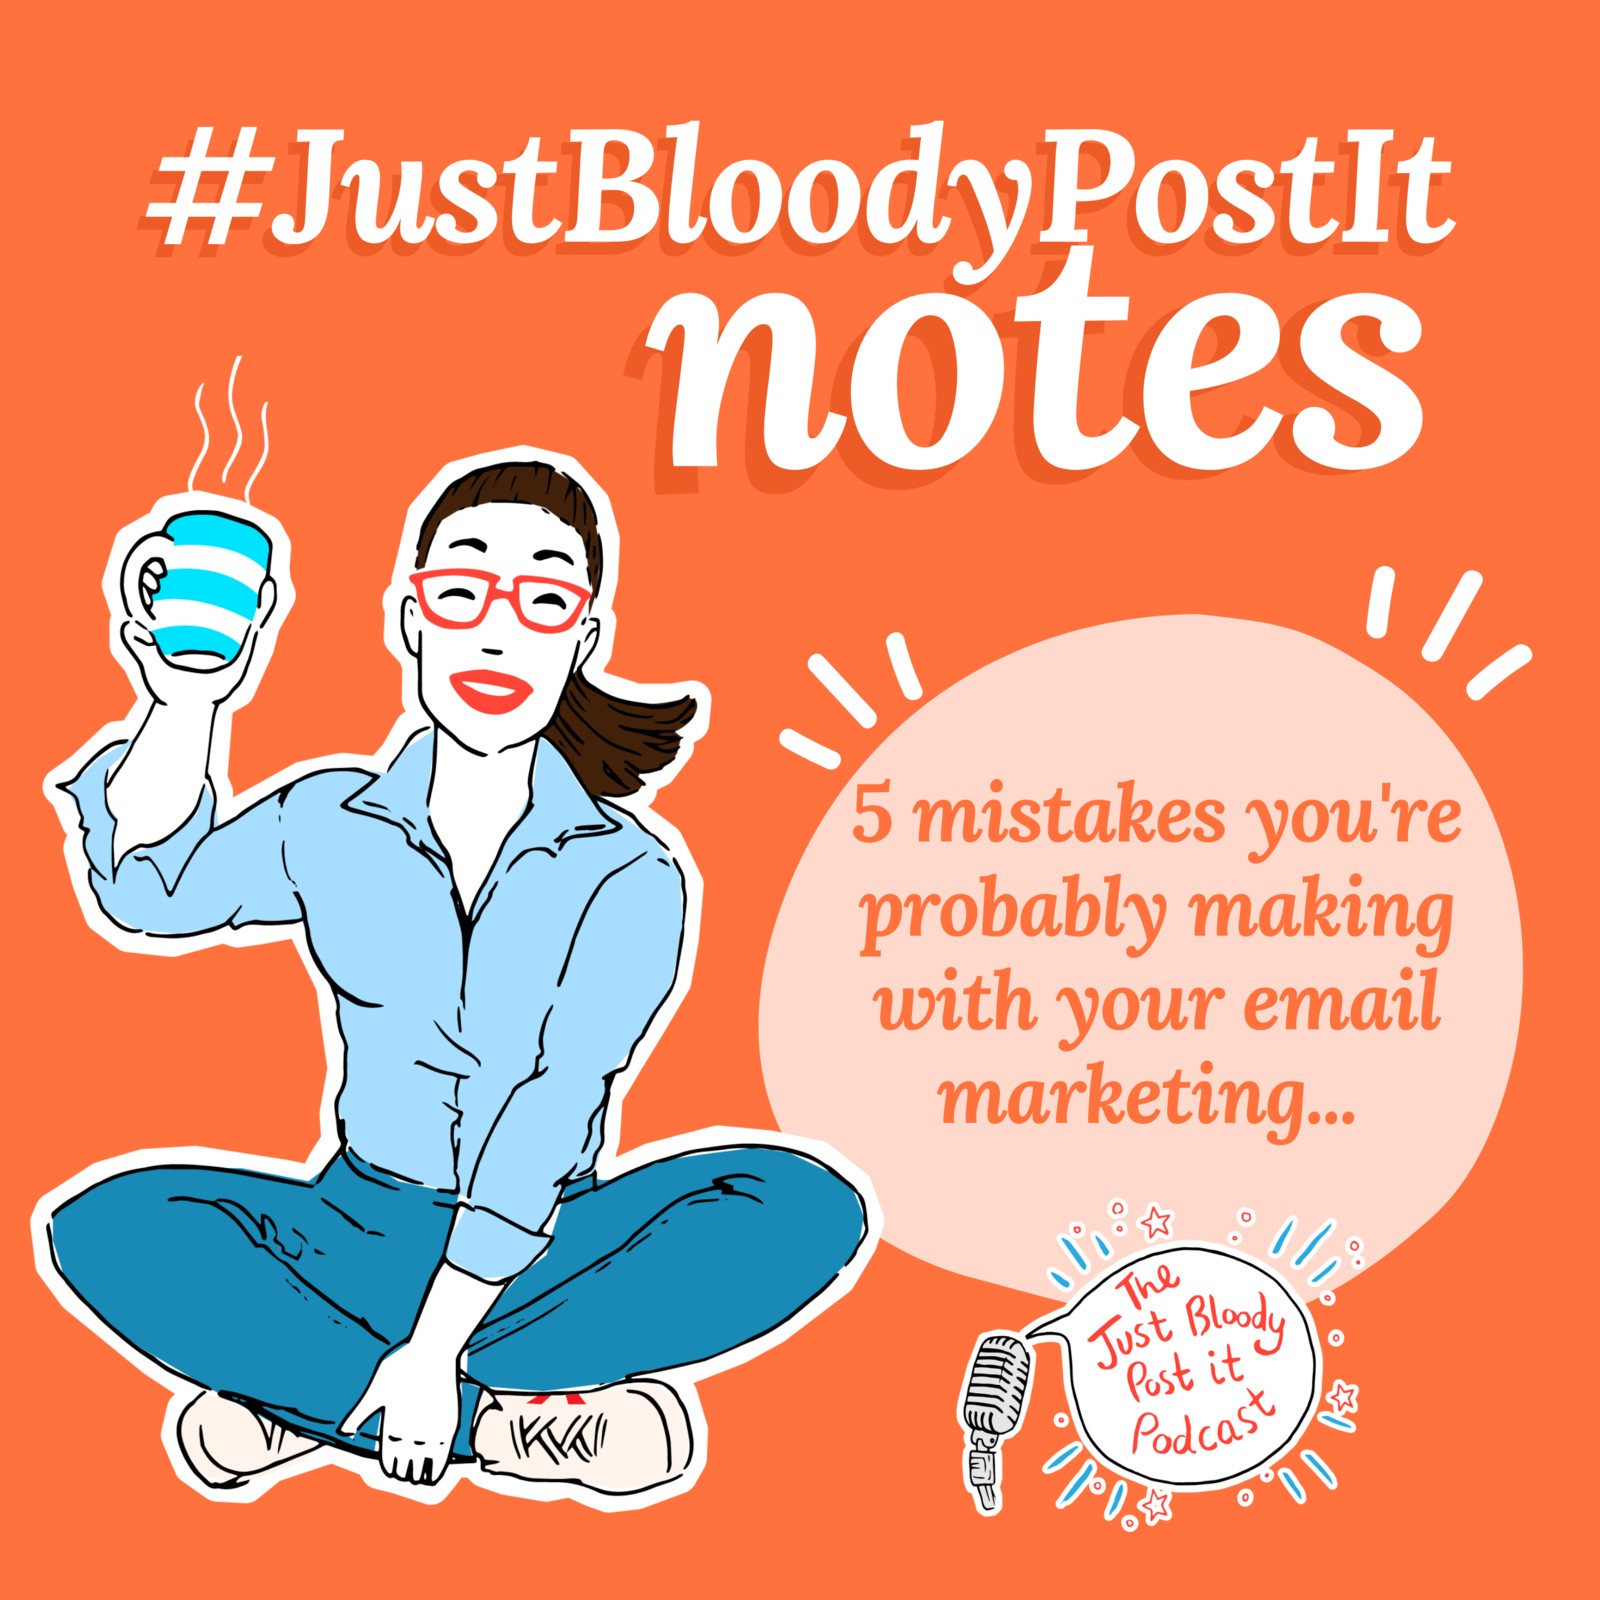 S4 Ep68: The 5 mistakes you're maybe (probably) making with your email marketing a #JustBloodyPostIt Note